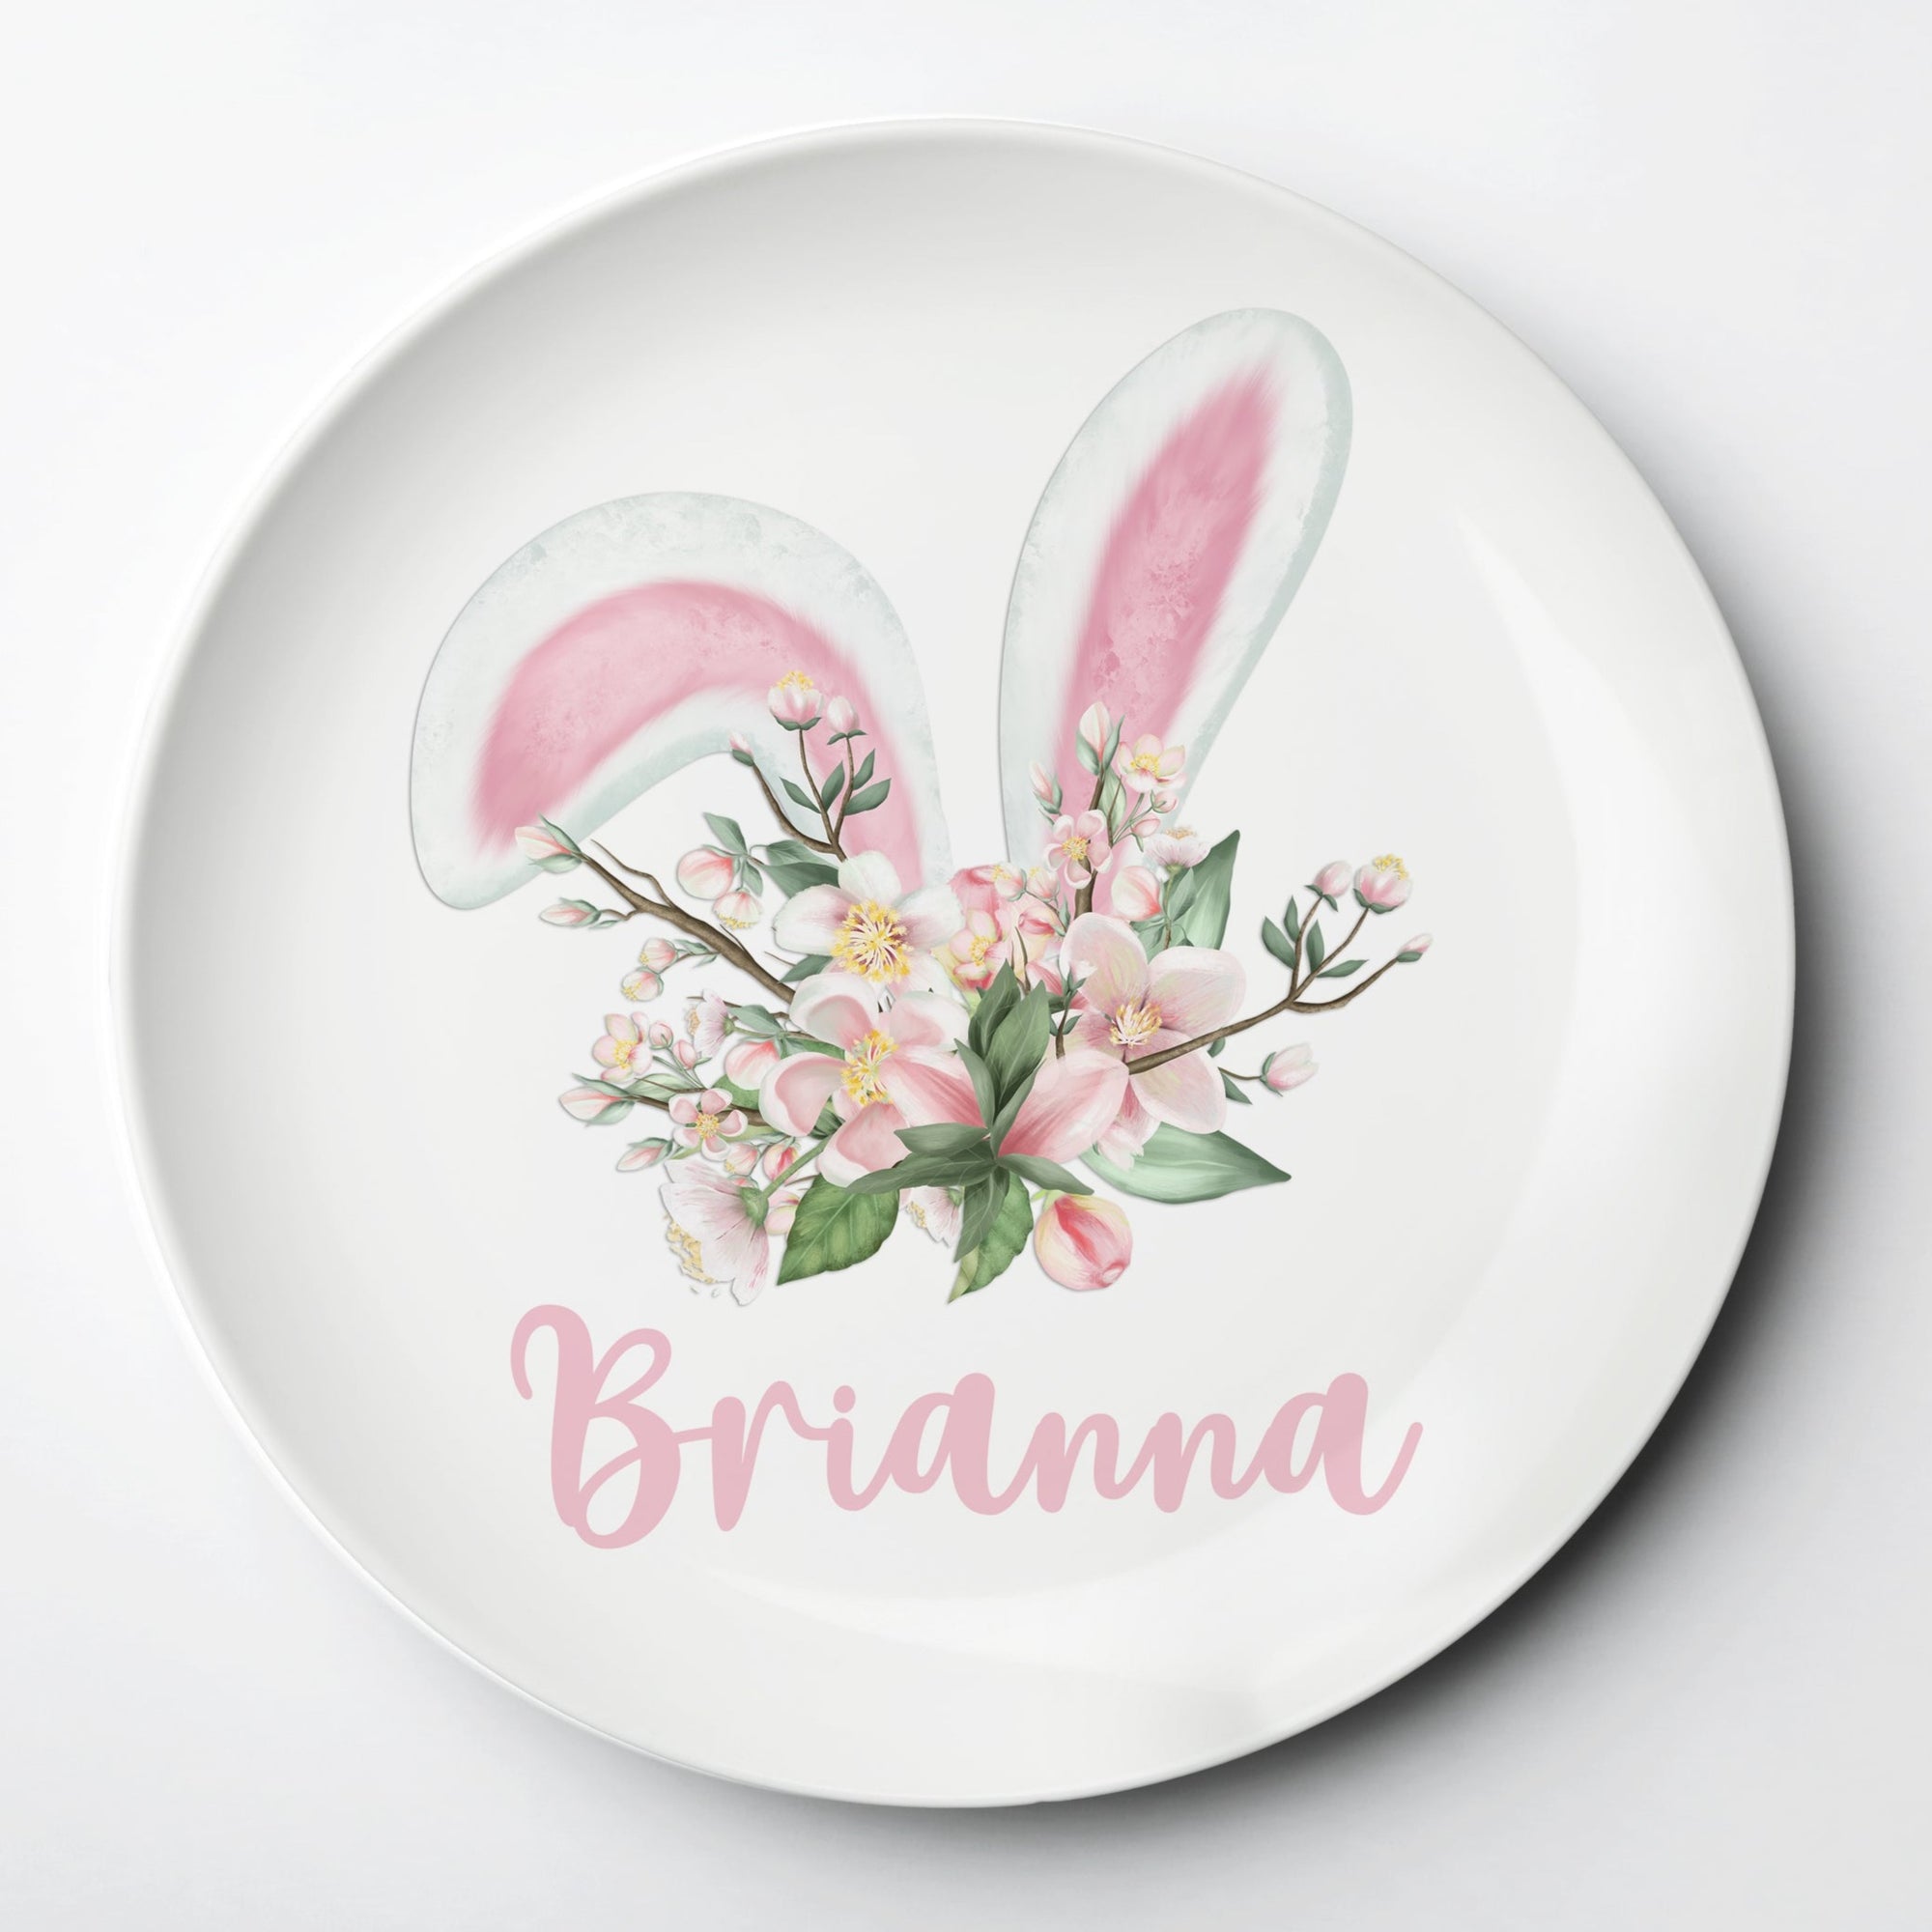 Bunny Ears Personalized Easter Plate for girls, with floral accents, microwave, dishwasher, and oven safe - lasts for years